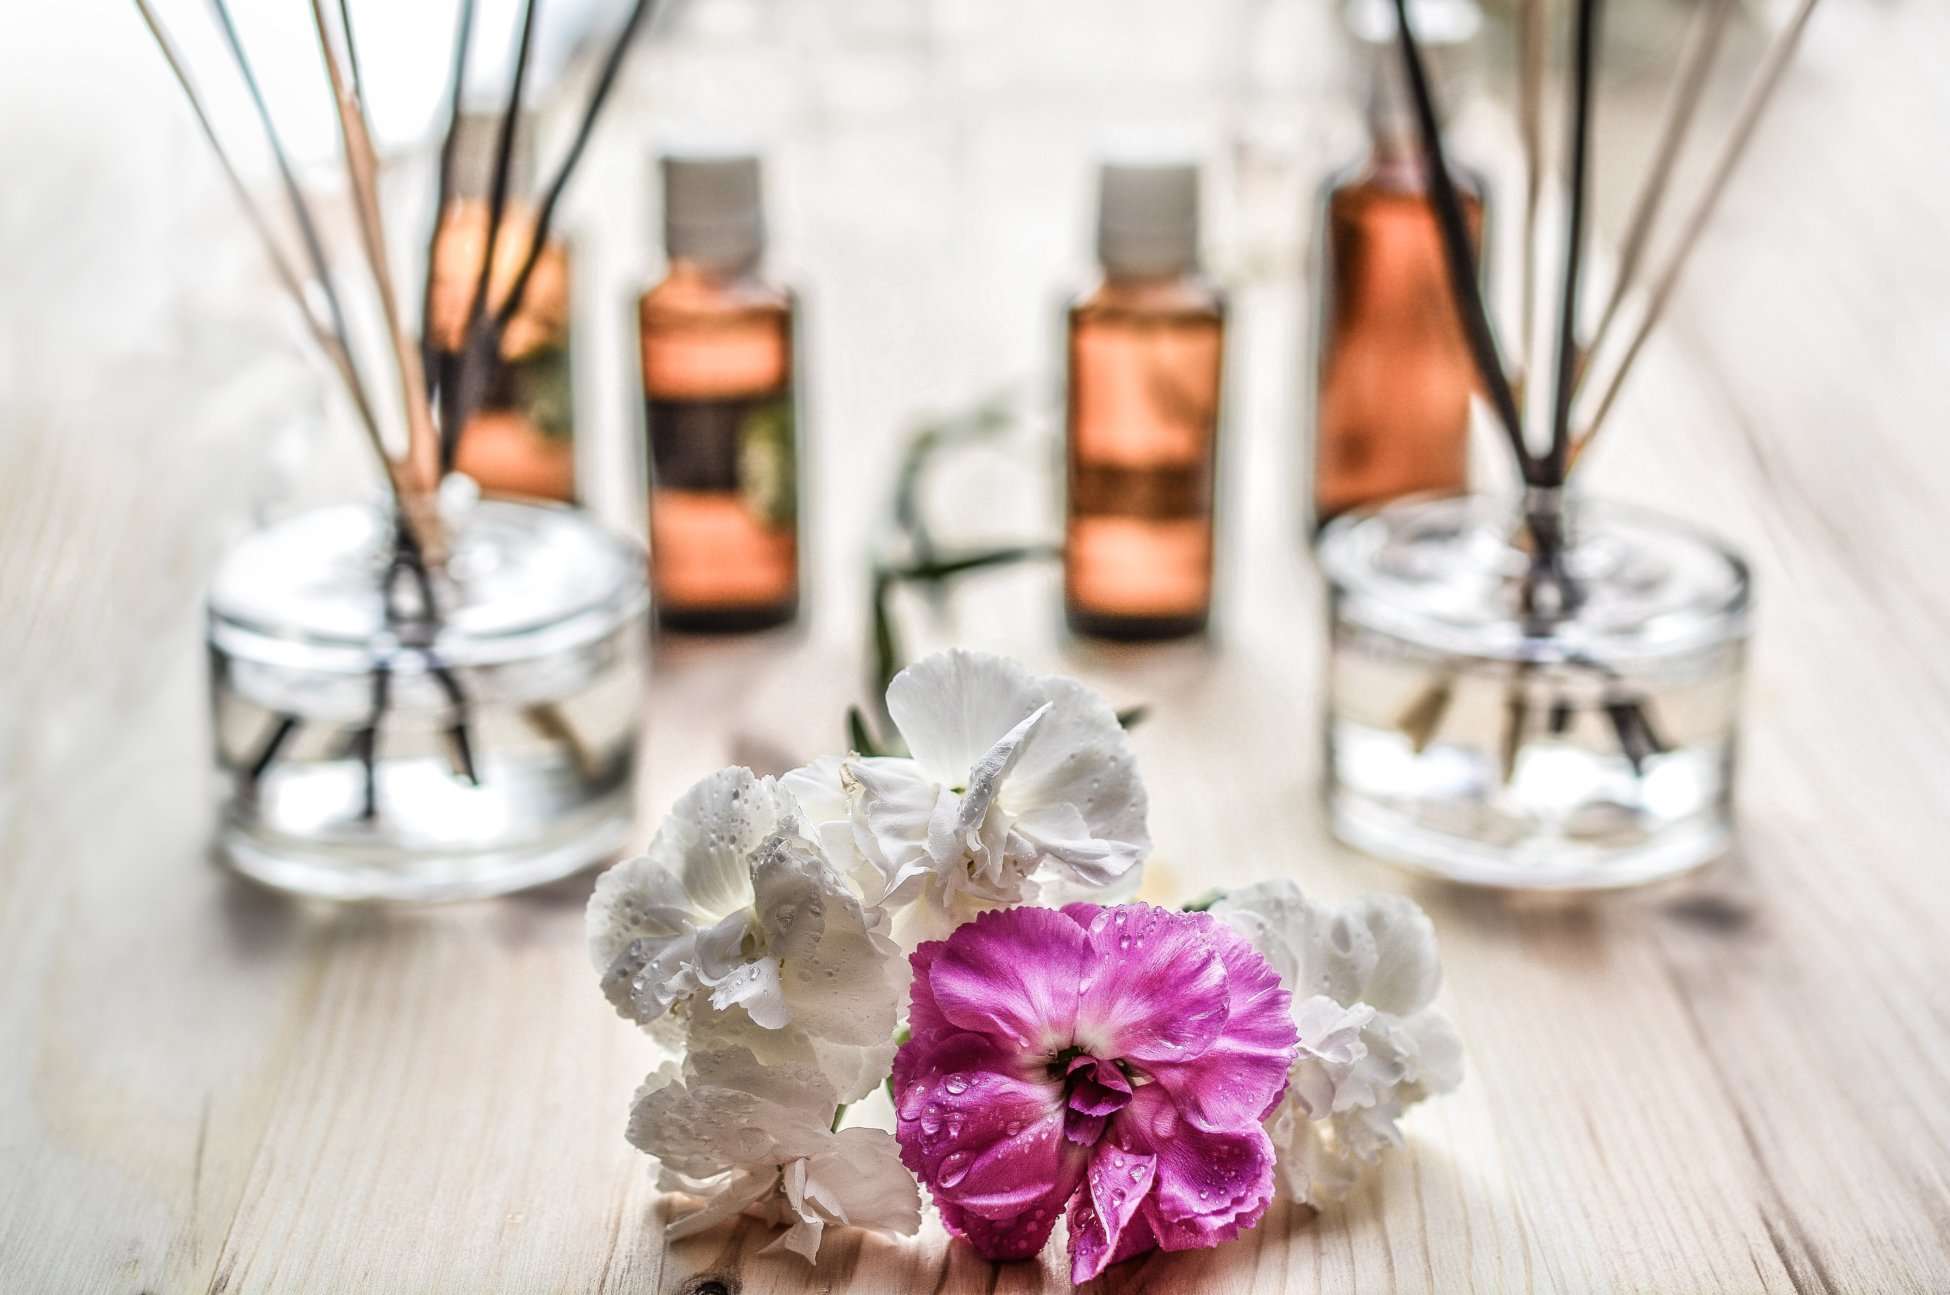 Essential oils are used for aromatherapy